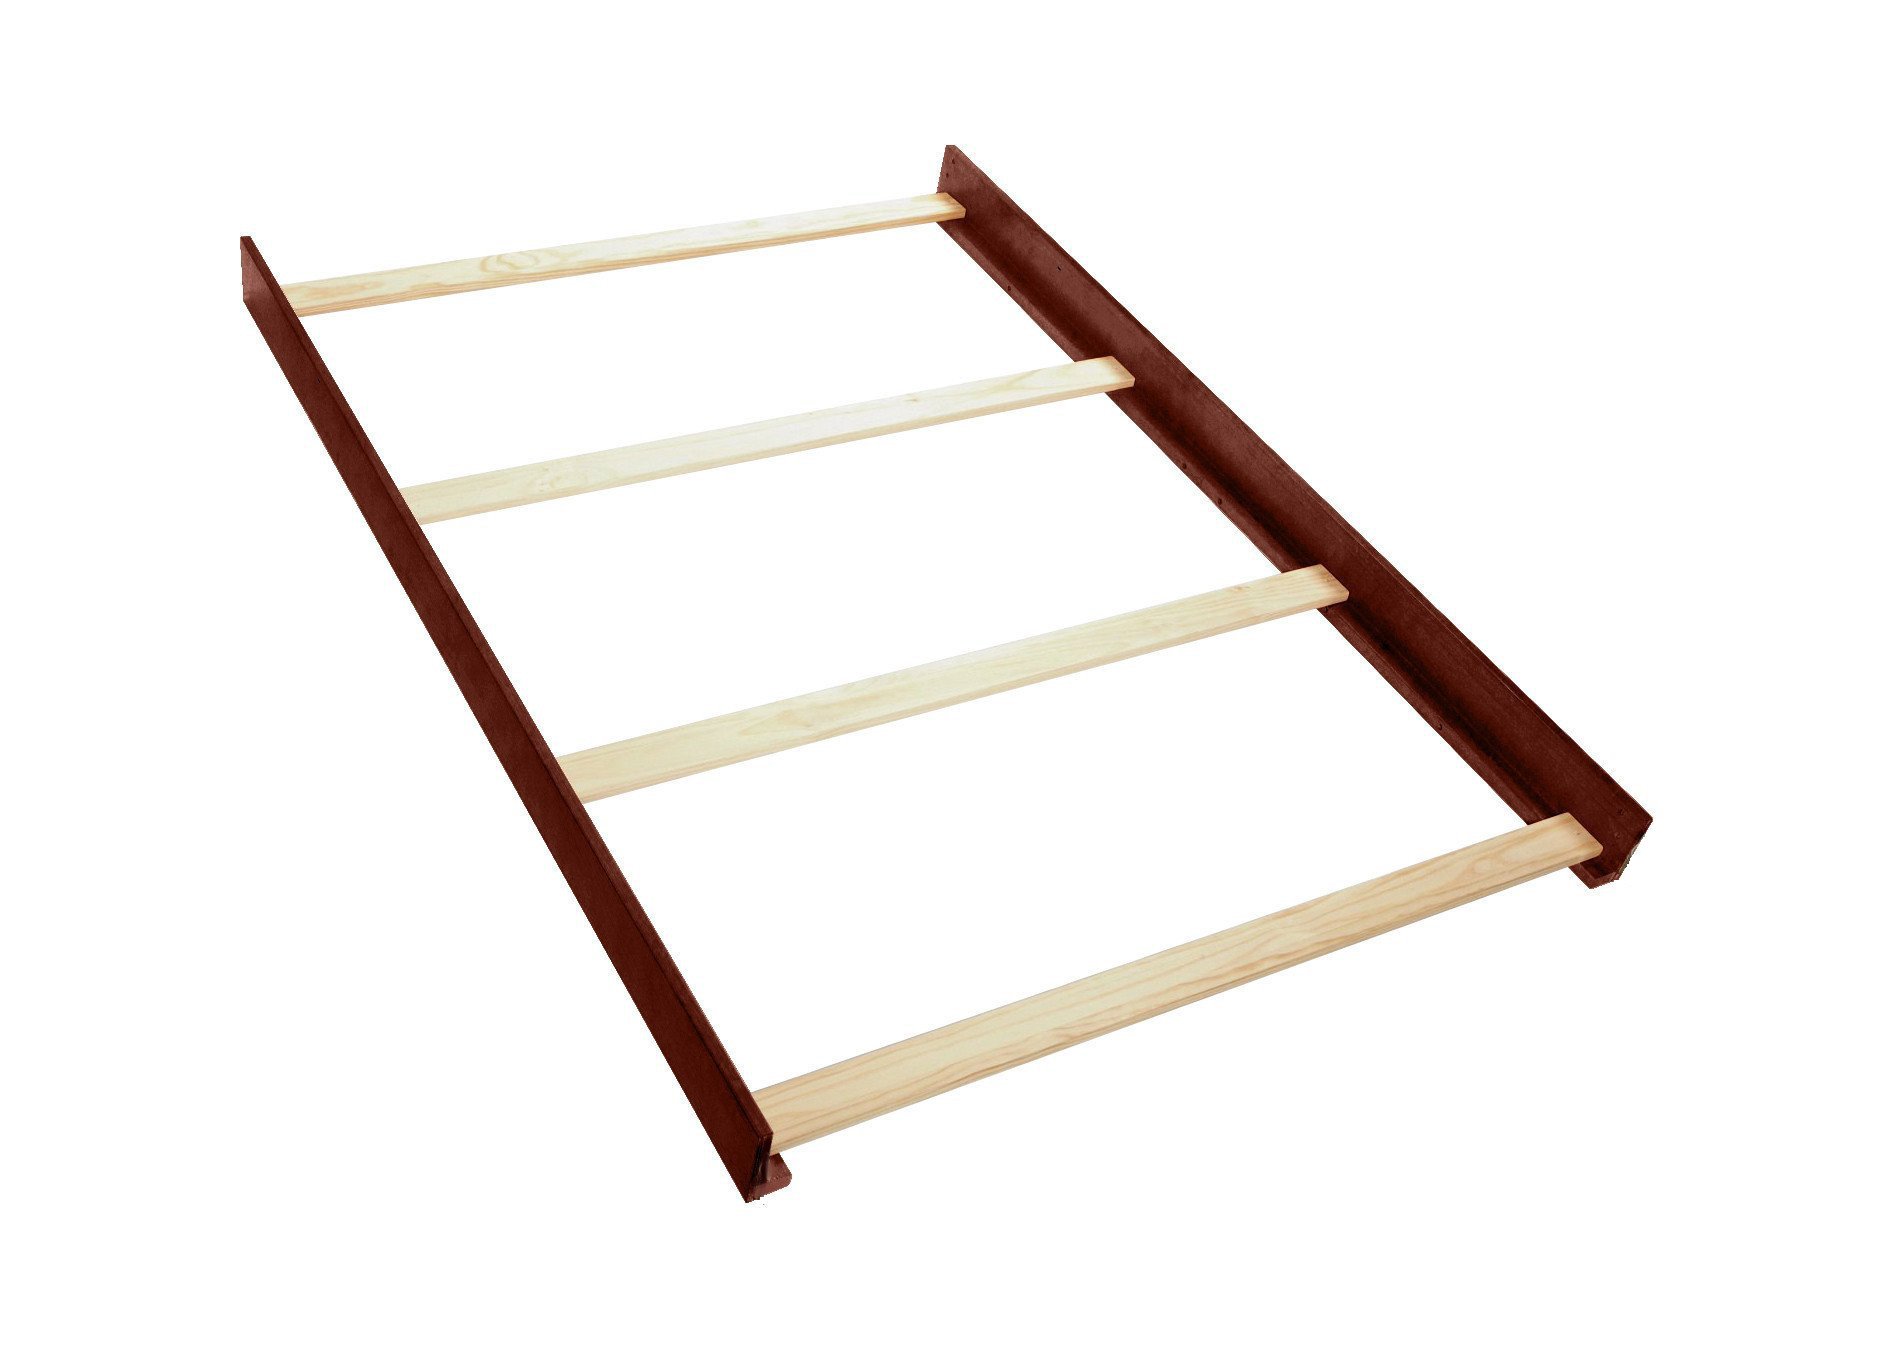 CC Kits Full Size conversion Kit Bed Rails for Baby cache cribs Multiple Finishes Available (cherry)